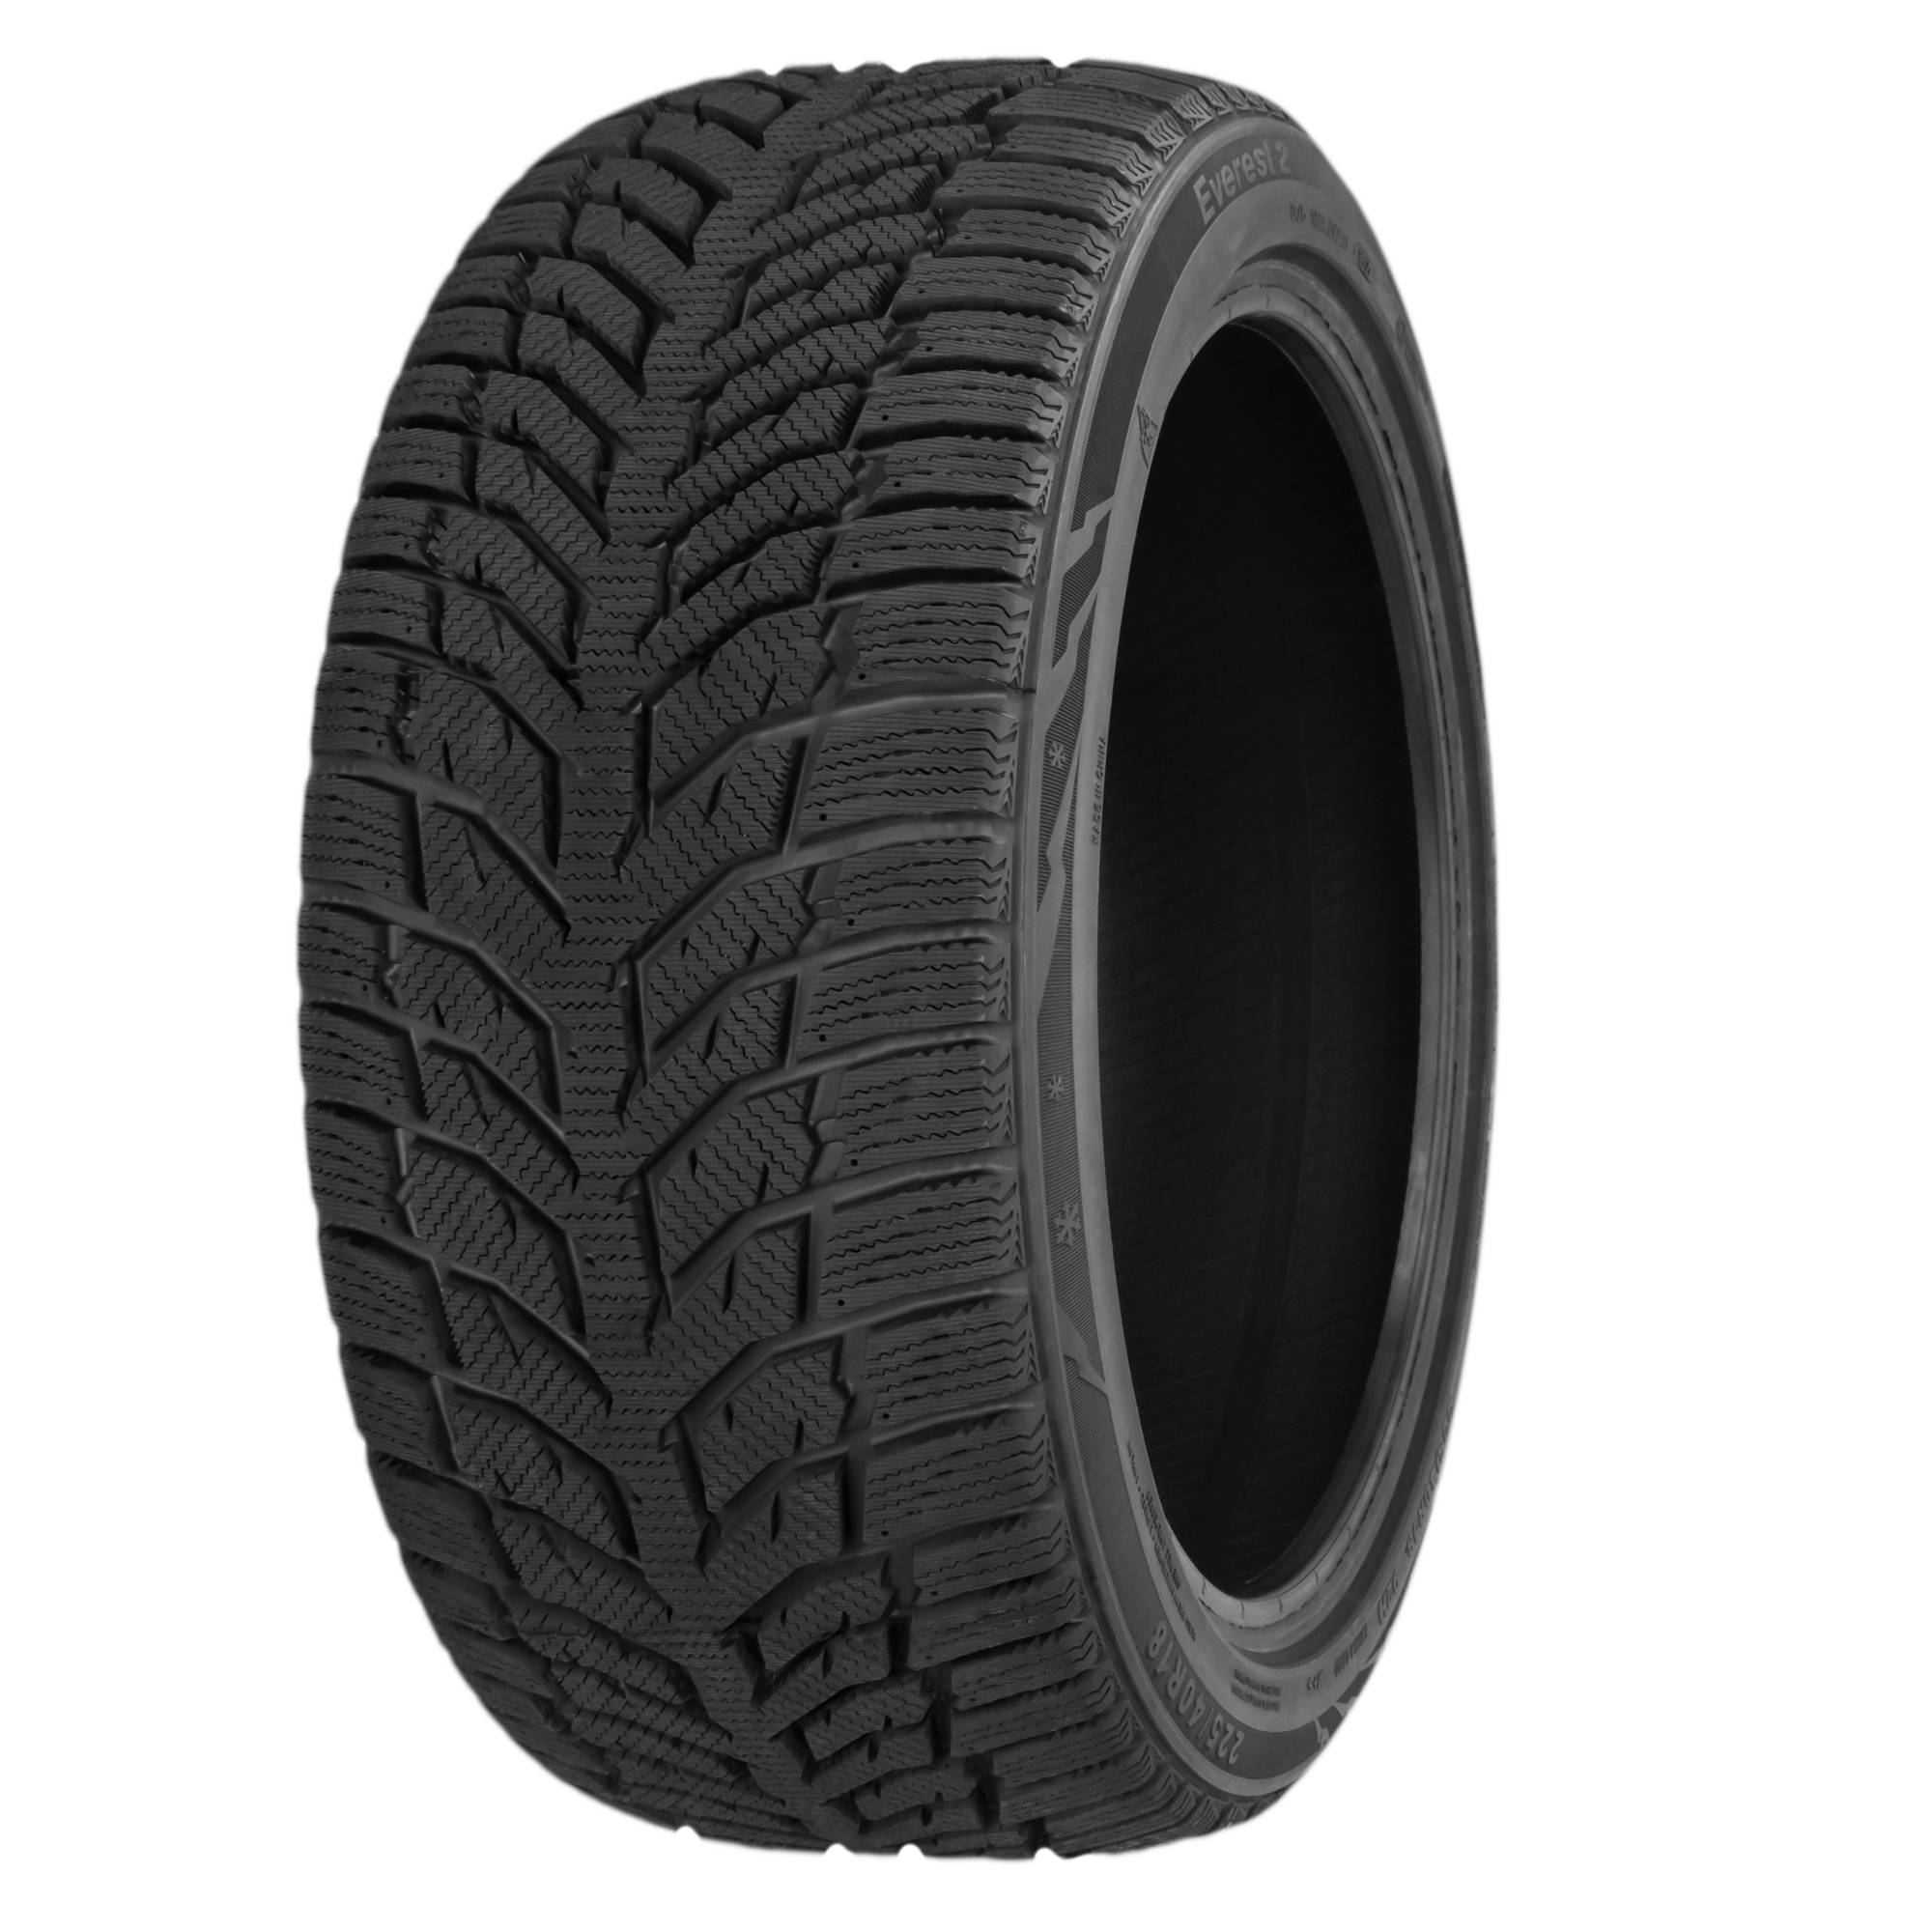 EAN 4250084605370, SYRON EVEREST 2 M+S 3PMSF, 225/55 R17 97 T